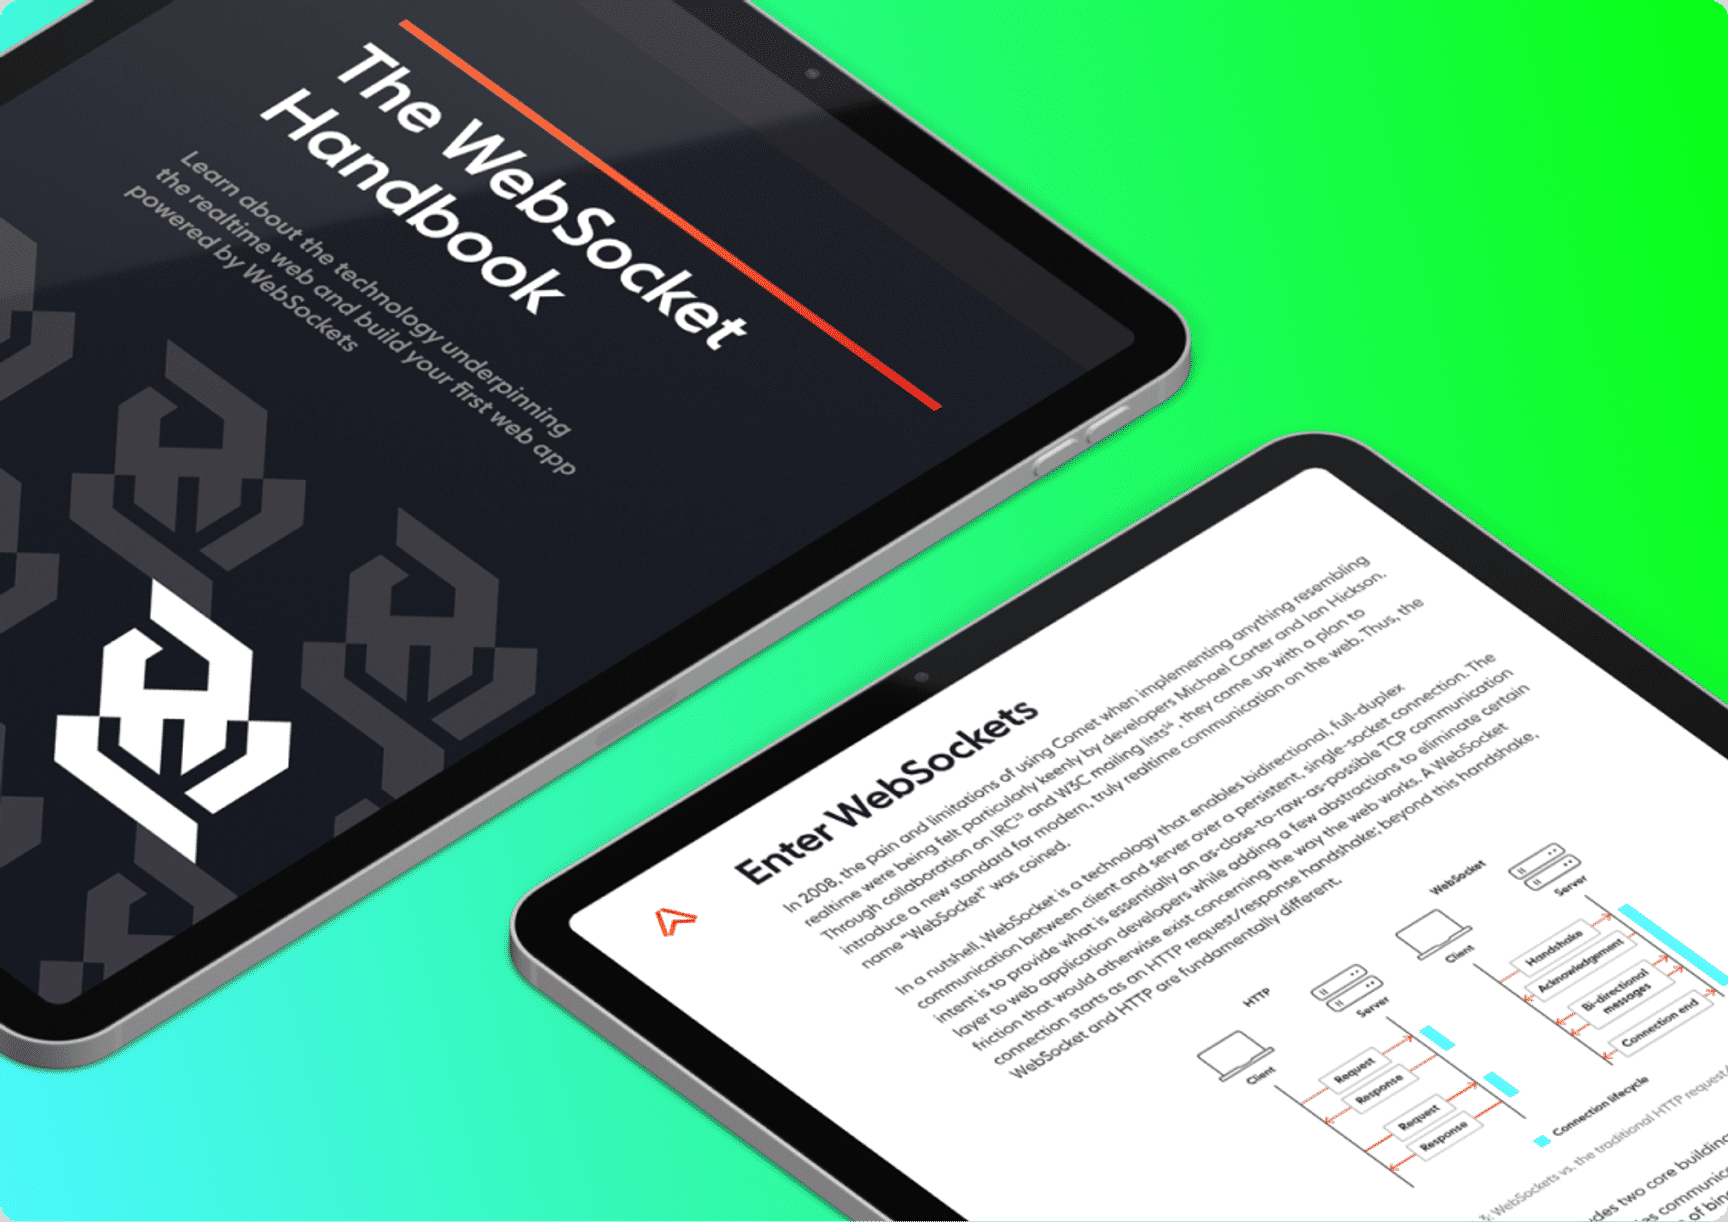 The WebSocket Handbook: learn about the technology behind the realtime web